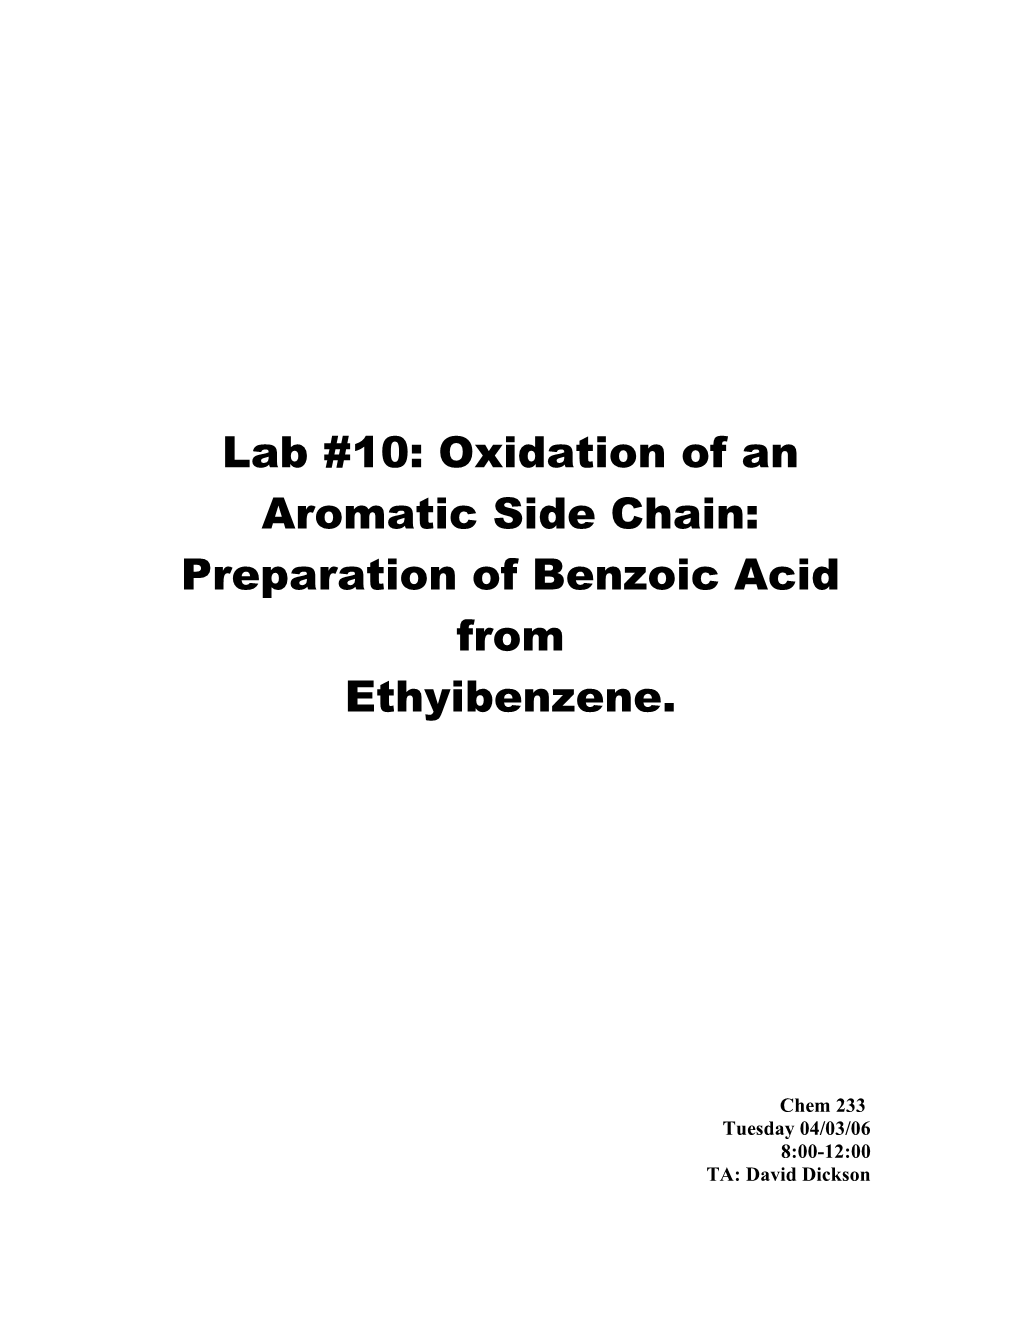 Lab #10: Oxidation of an Aromatic Side Chain: Preparation of Benzoic Acid From